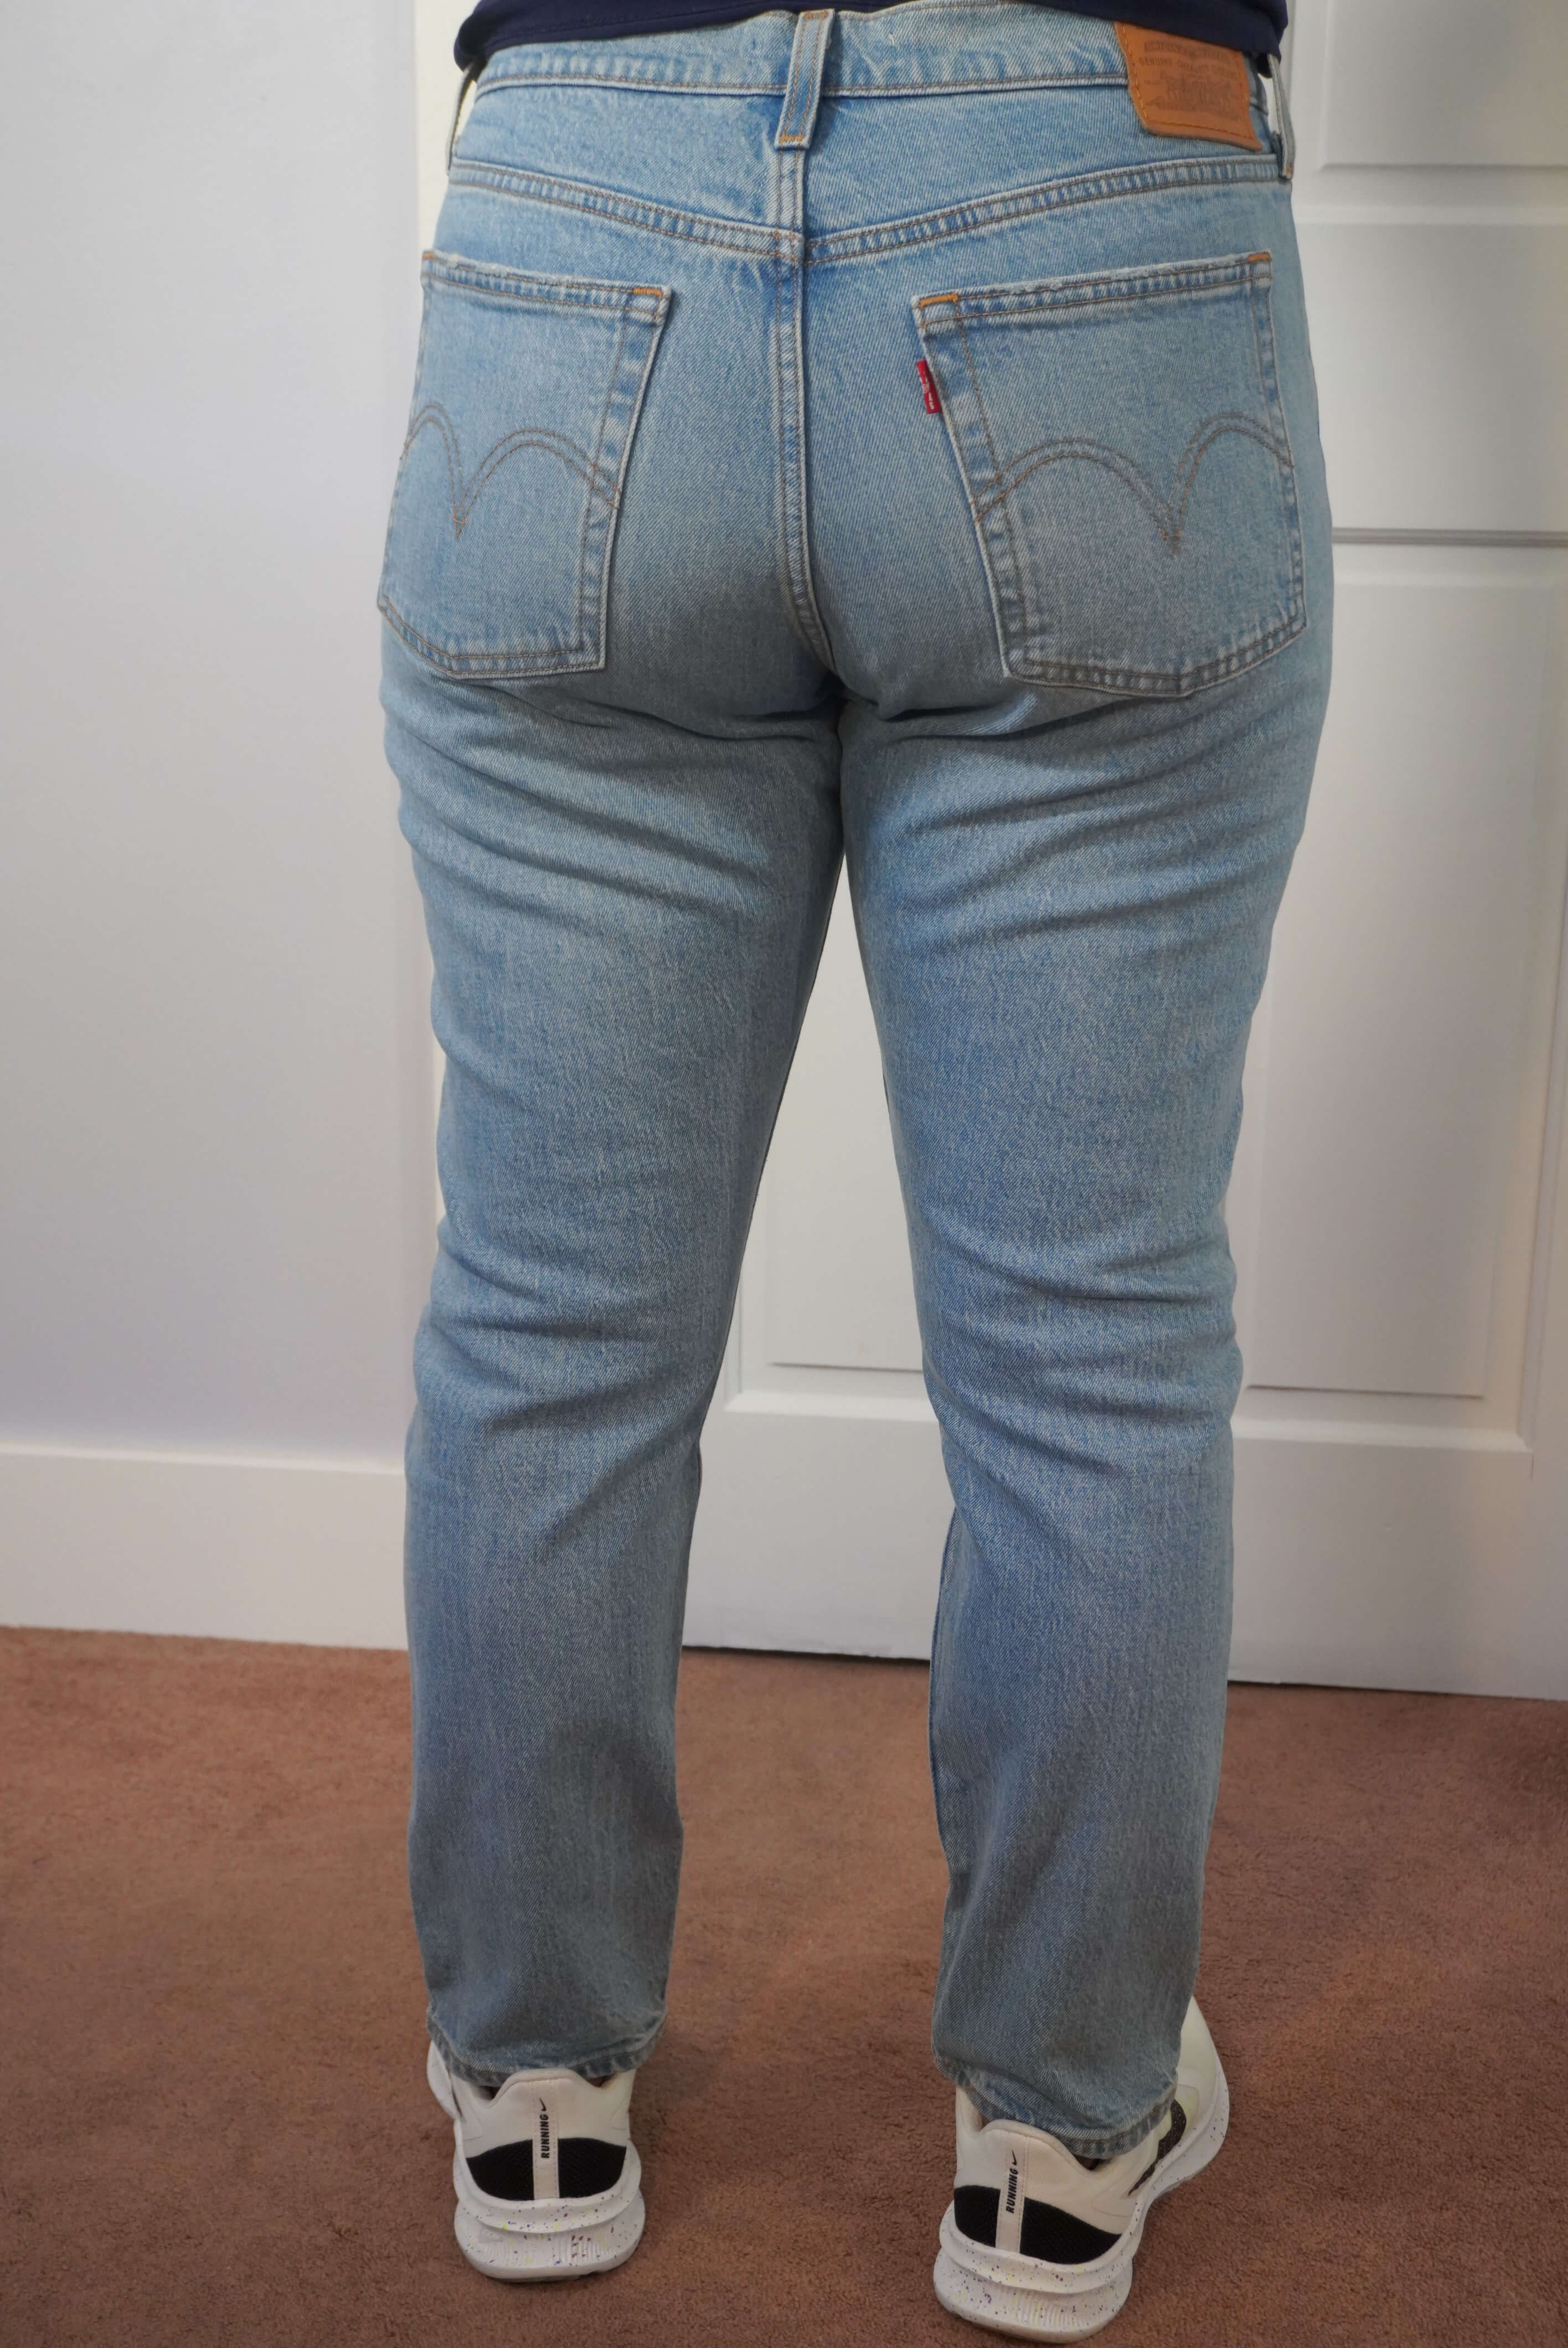 This image shows a back view of the author wearing a pair of Levi's Wedgie jeans in a light blue wash. This shows a tighter fit in the buttocks area.